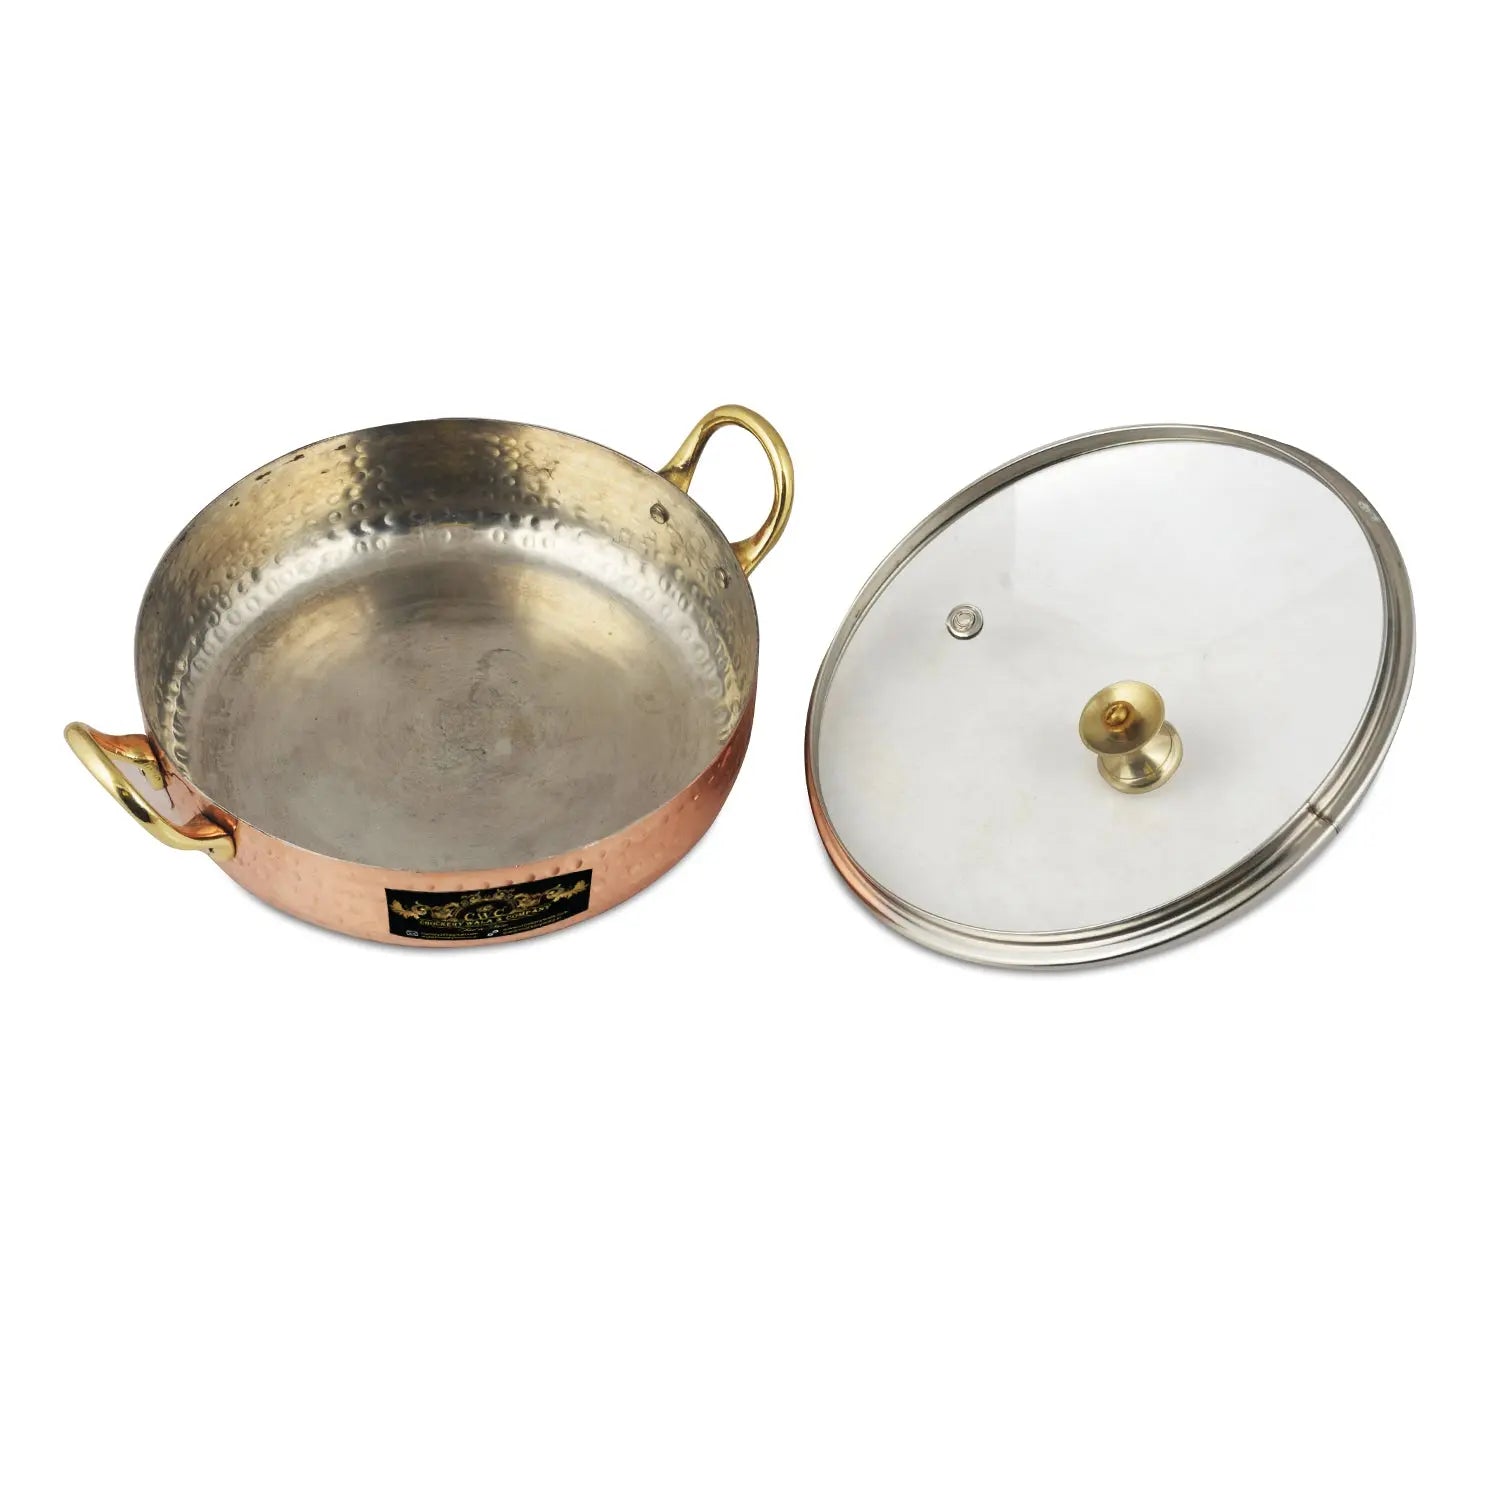 Copper Handi Set For Serving & Cooking 700 ml each - CROCKERY WALA AND COMPANY 